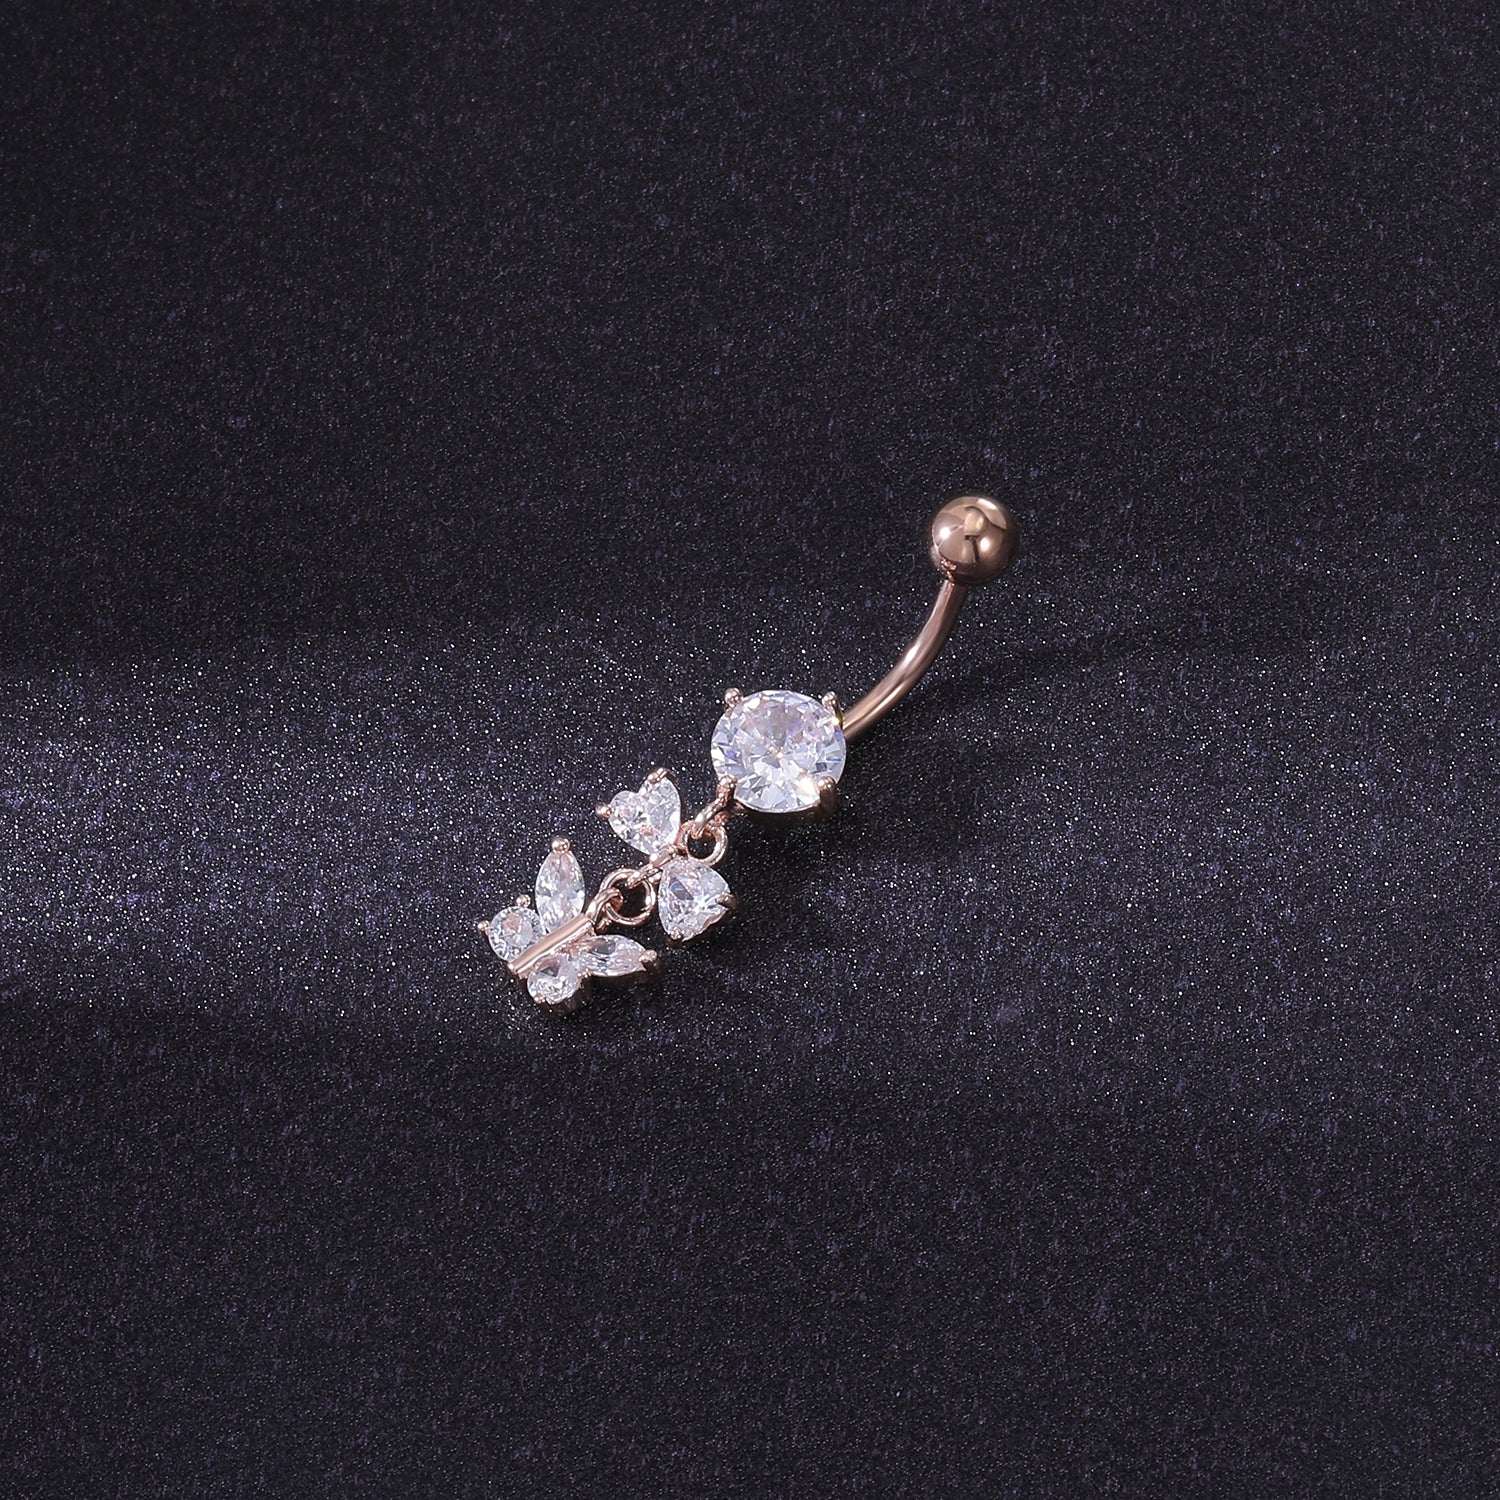 14g-Shiny-Zircon-Butterfly-Navel-Rings-Rose-Gold-Drop-Dangle-Belly-Navel-Piercing-Jewelry